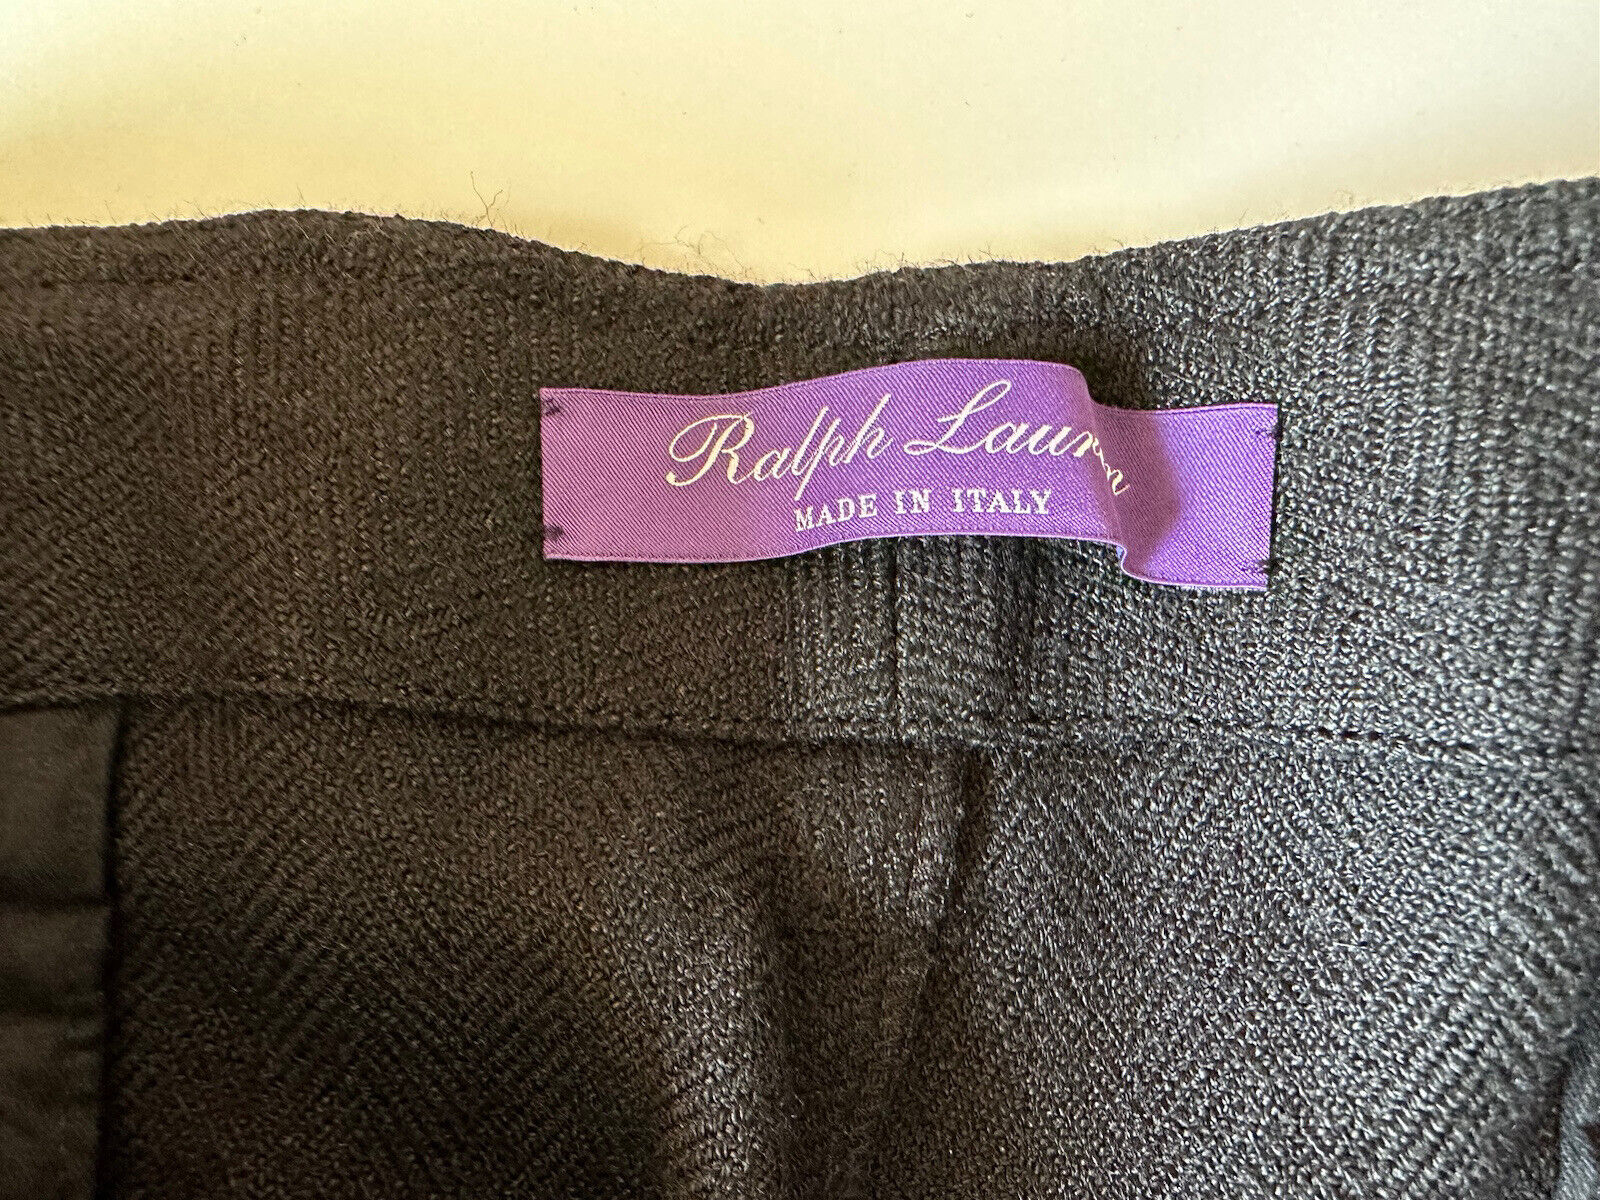 NWT $595 Ralph Lauren Purple Label Casual Pocket Pants Black 38/32 Made in Italy